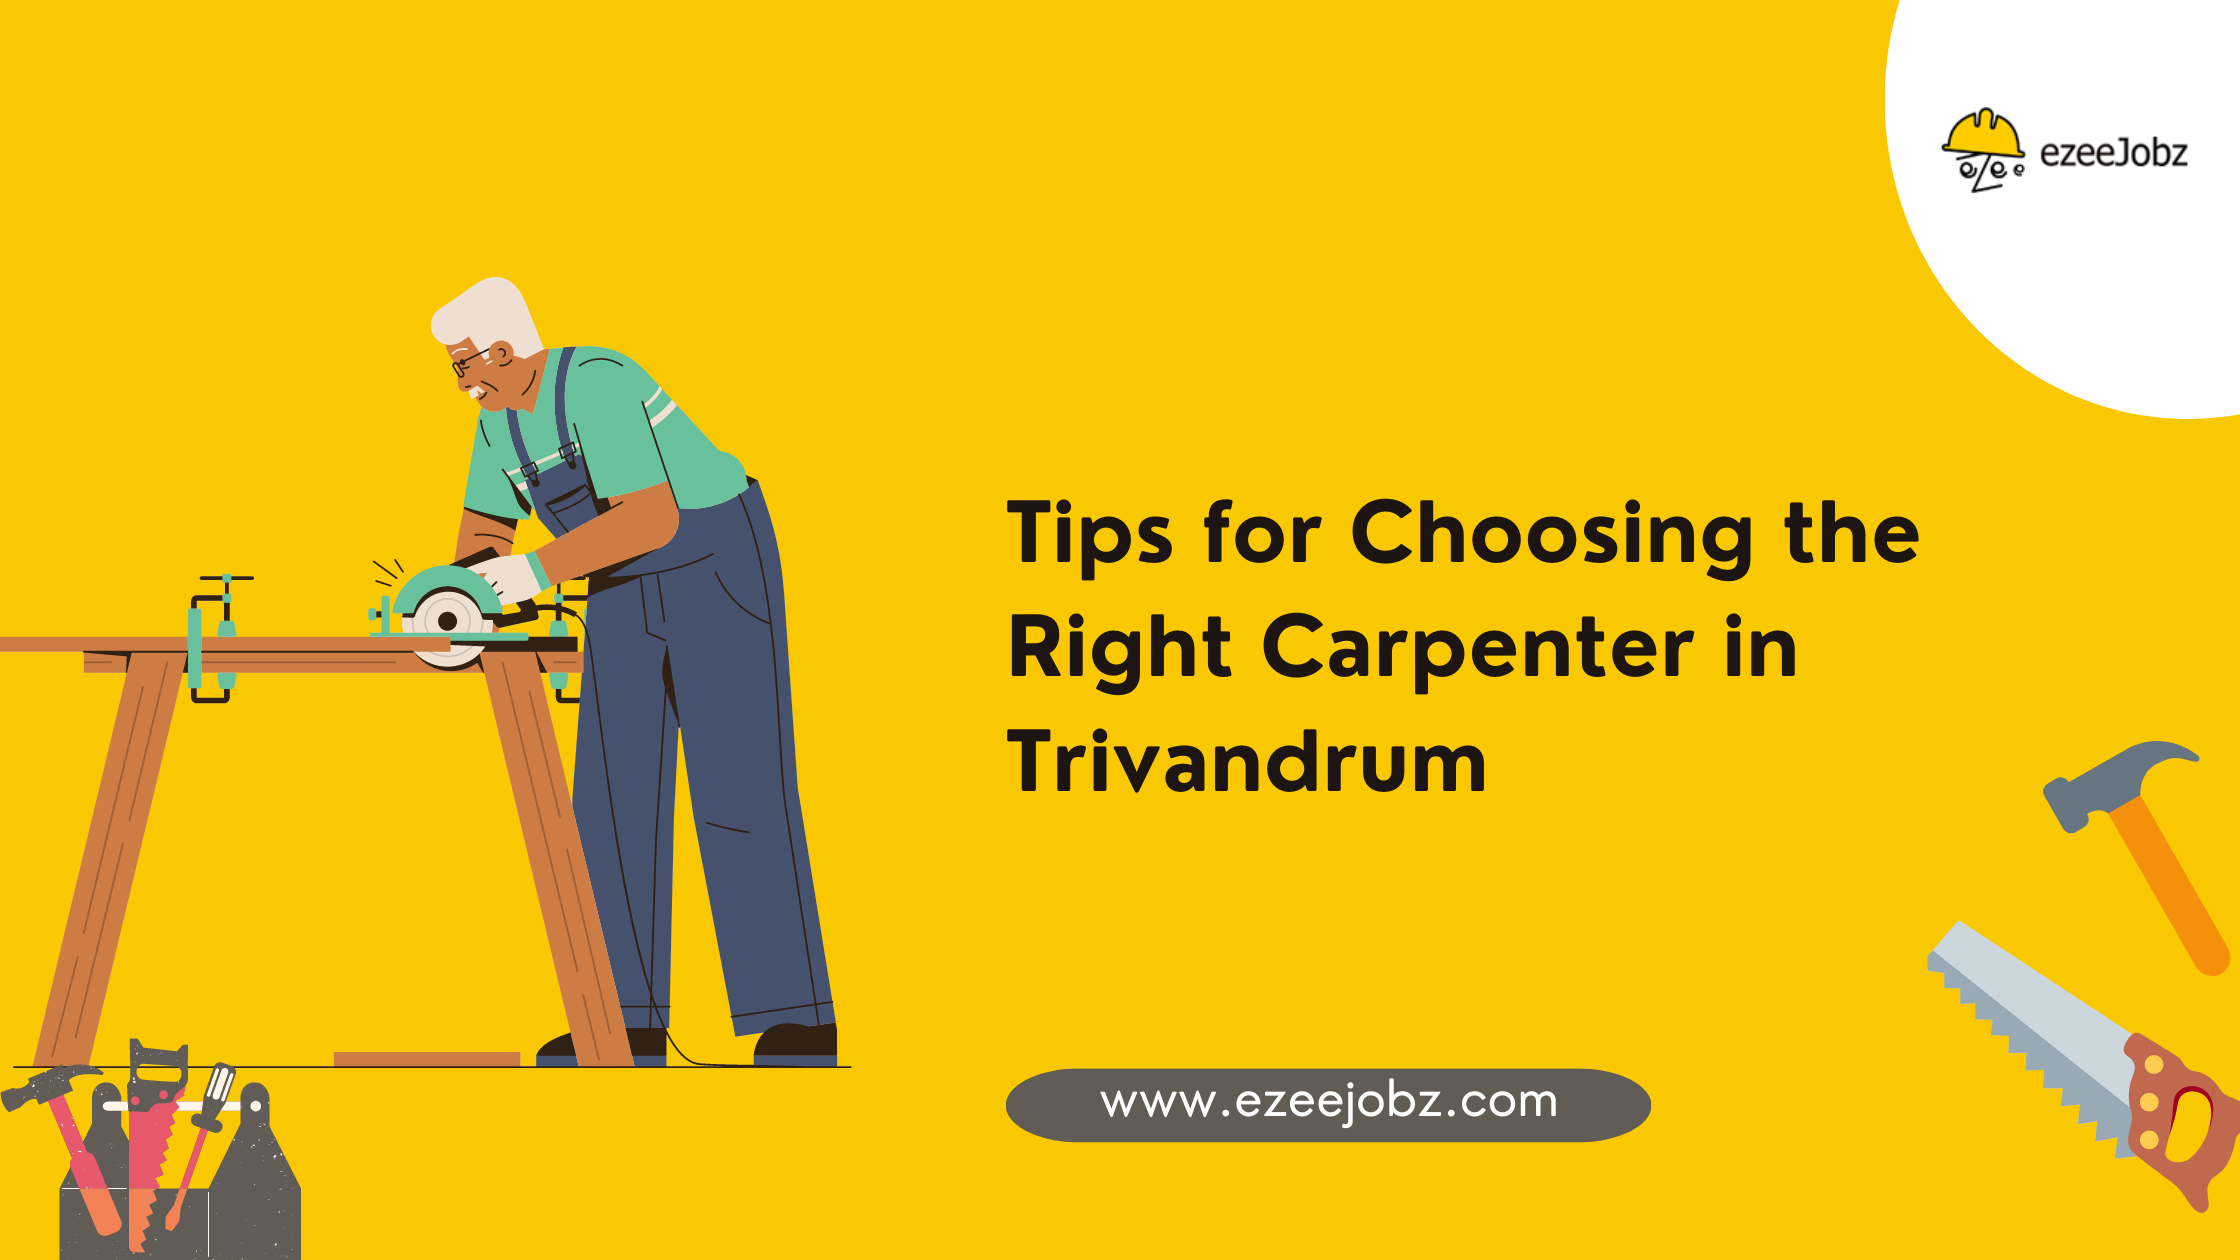 Tips for Choosing the Right Carpenter in Trivandrum